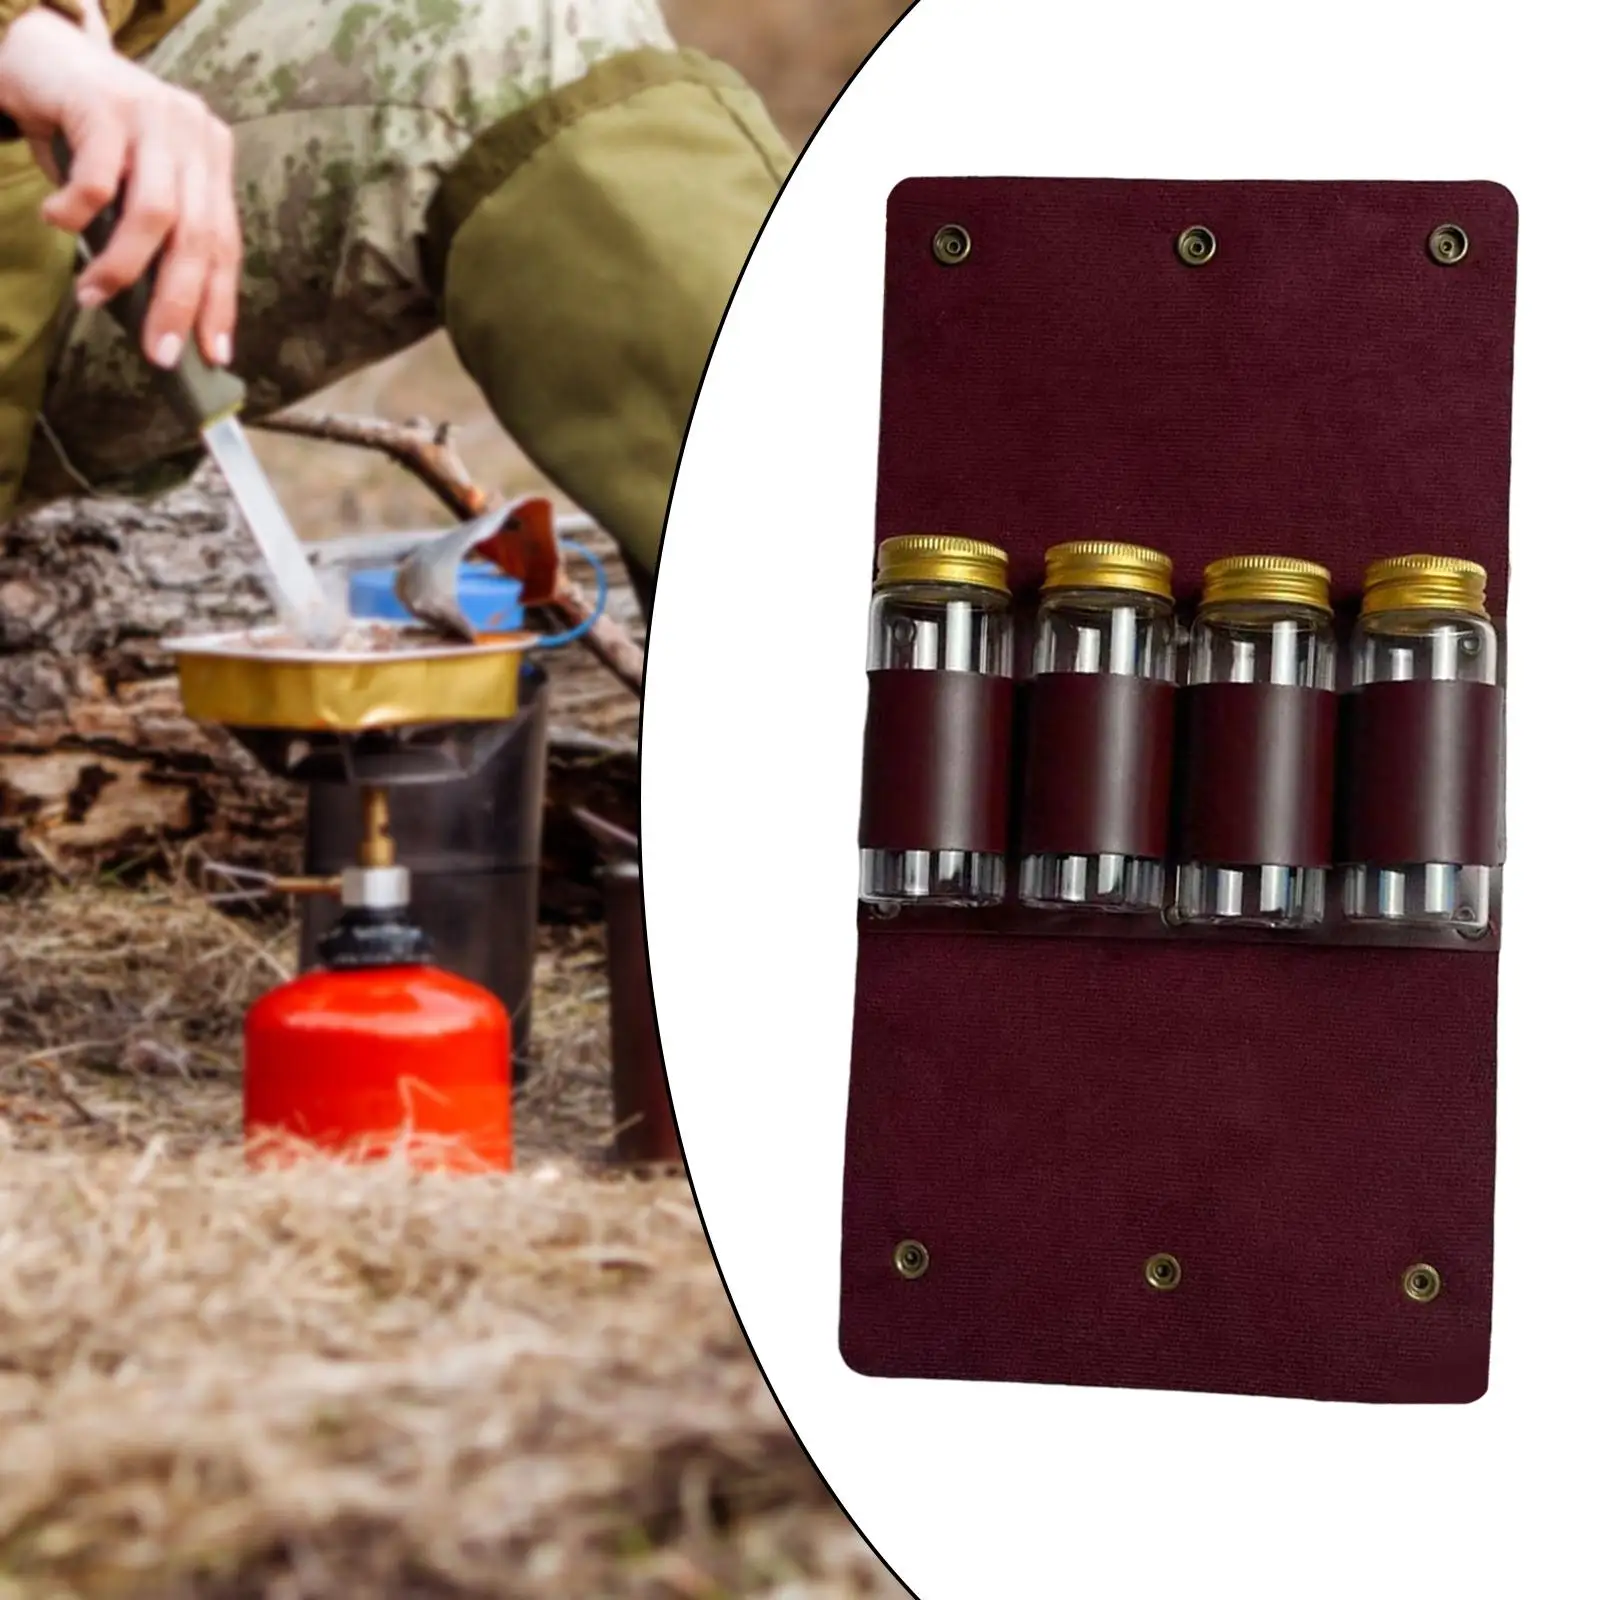 Condiment Bottle Kit with Storage Pouch Spice Jar Containers Spice Seasoning Bottle for Camping Traveling Hiking Barbecue Picnic